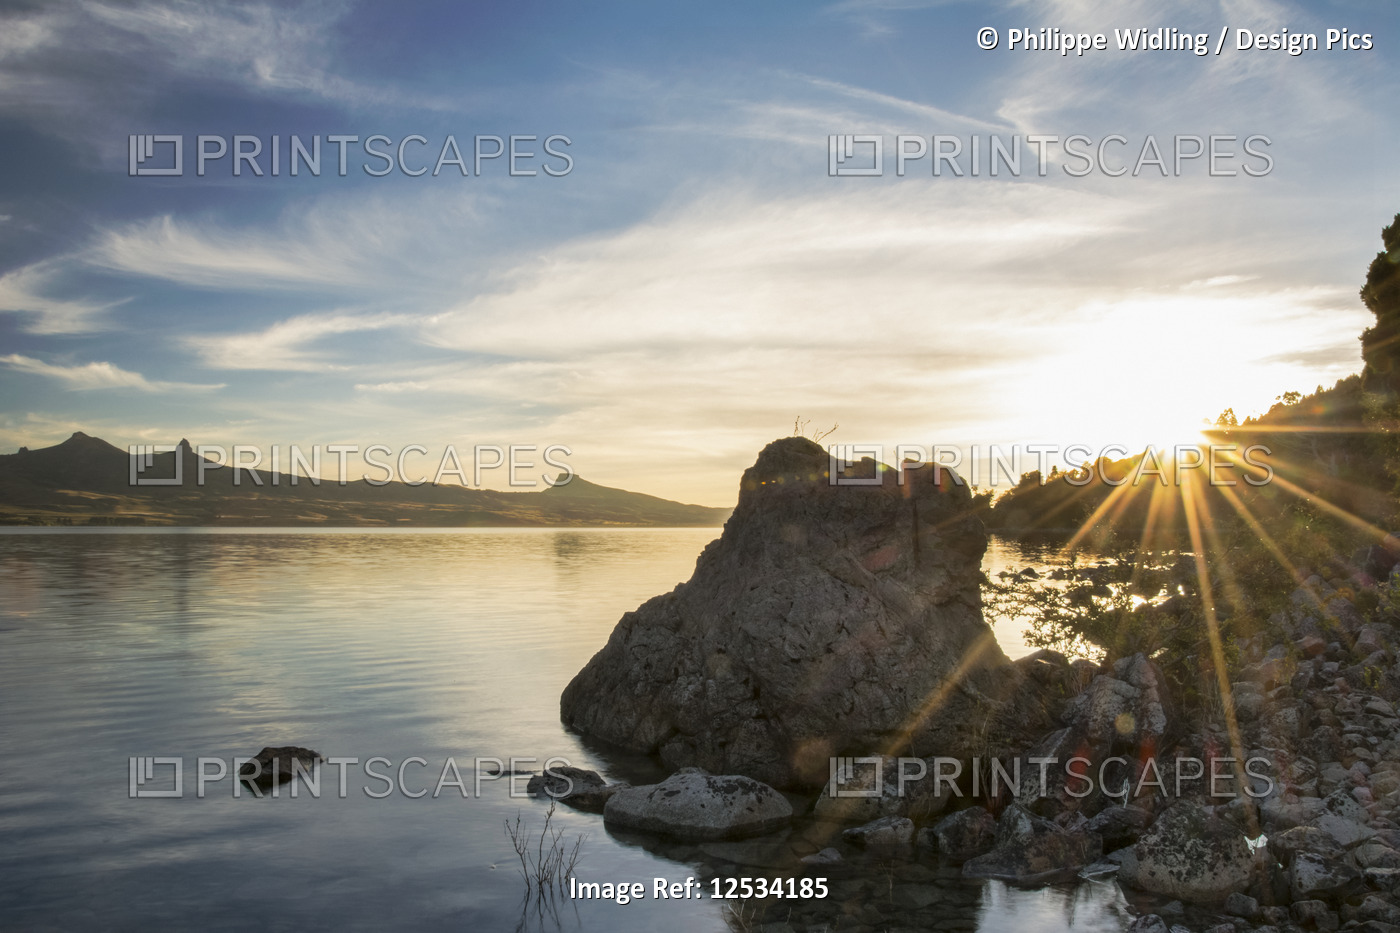 The sun rising on a lake causing a sunburst on the righthand side of the image; ...